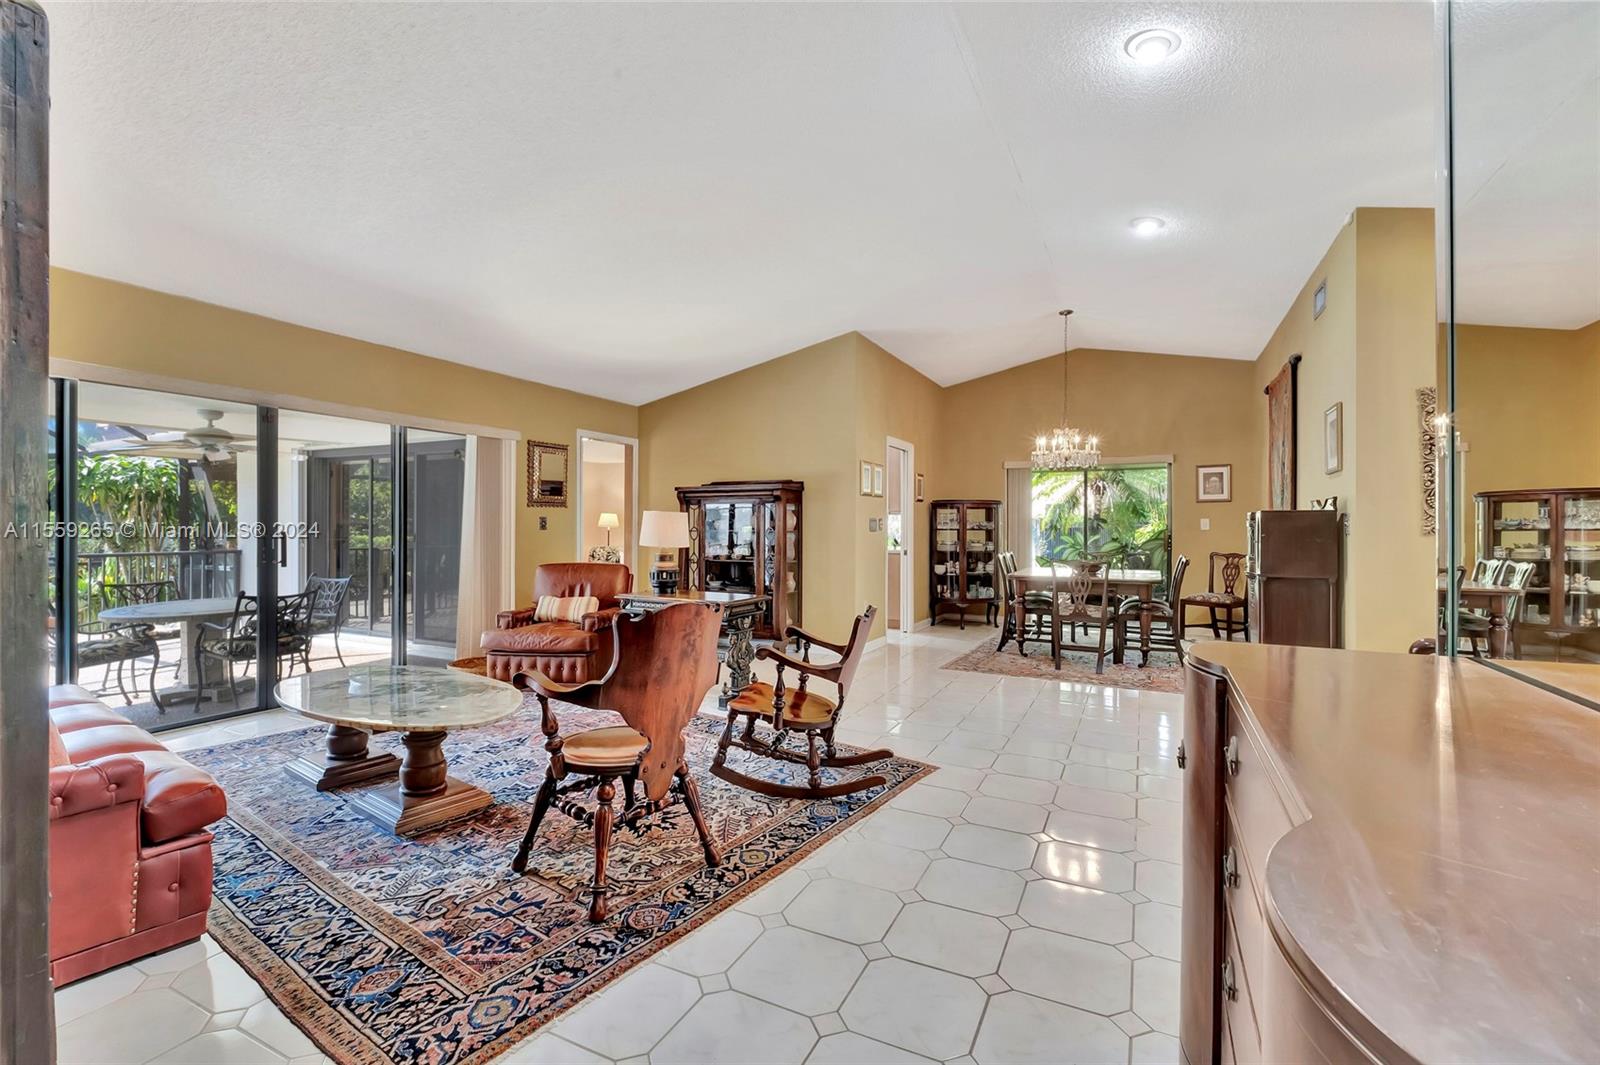 OPEN HOUSE 4/6/24 @ 11:00 am - 3:00 pm!! Highly sought-after location off OLD CUTLER ROAD! This alluring retreat sits on a tranquil CUL DE SAC with NO HOA - Features: SCREENED IN POOL recently resurfaced pebble patio on a BUILDER'S HALF ACRE LOT surrounded by LUSH TREES of all Kinds (see attached list).  This SPACIOUS HOME is perfect for entertaining with Unique Touches such as Coy Fish Pond and Fireplace.  CENTRALLY LOCATED About 5 Miles from FL Turnpike With Easy Access to Zoo Miami, Downtown Miami, Shopping, Fairchild Tropical Garden, Historic Deering Estate, and Black Pointe Marina. Which is great for FISHING Near Biscayne Bay that Faces The Atlantic Coast. A Short Trip To Key Largo and Key West! Bronze Mermaid Does NOT Convey